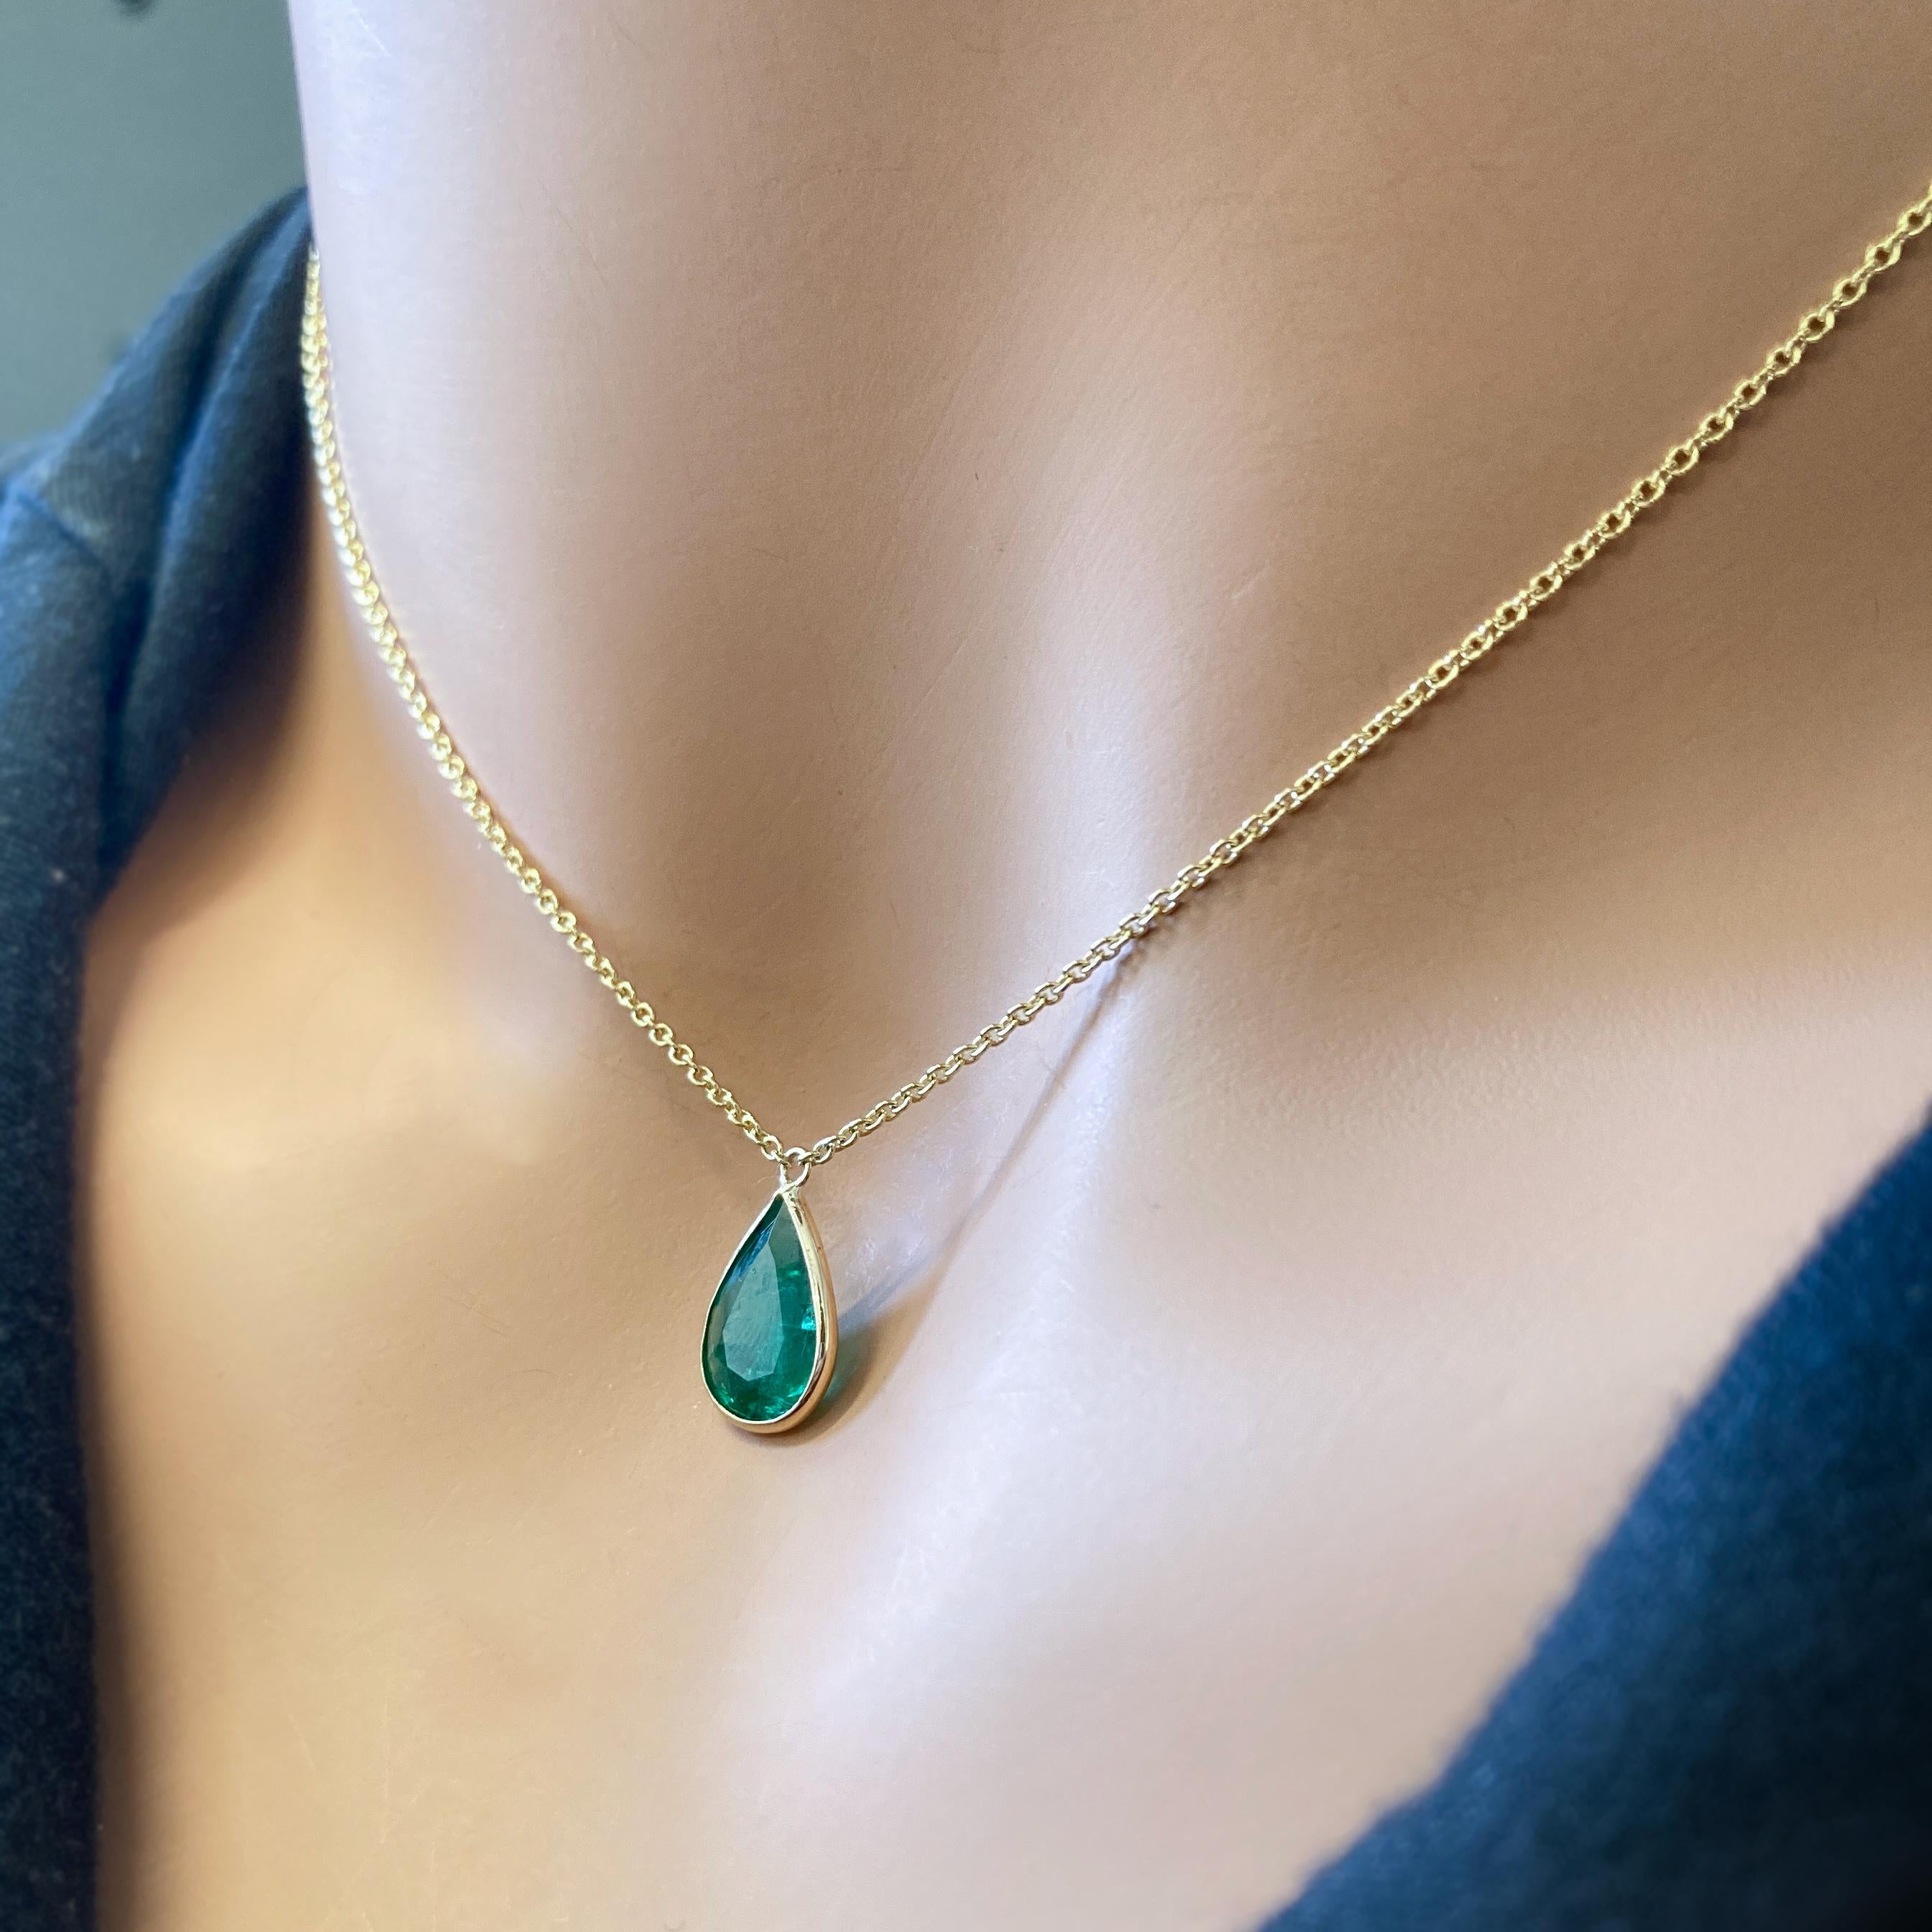 Contemporary 1.91 Carat Green Emerald Pear Shape Fashion Necklaces In 14K Yellow Gold For Sale